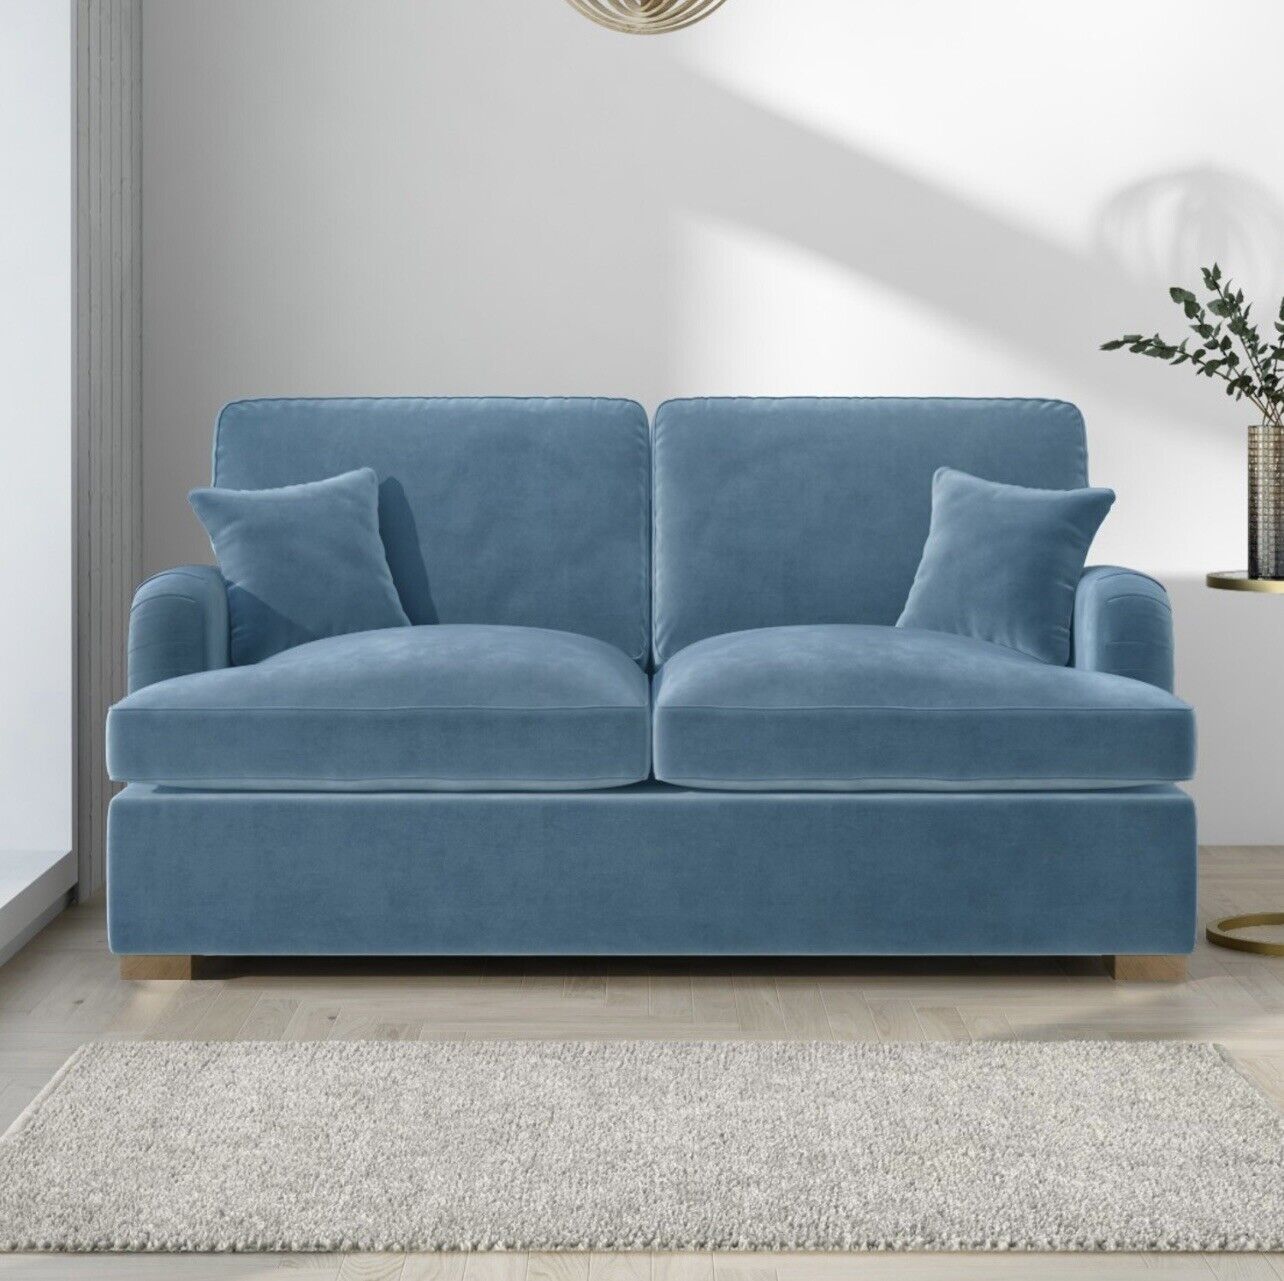 Velvet 2 Seater Sofa Bed with Cushions